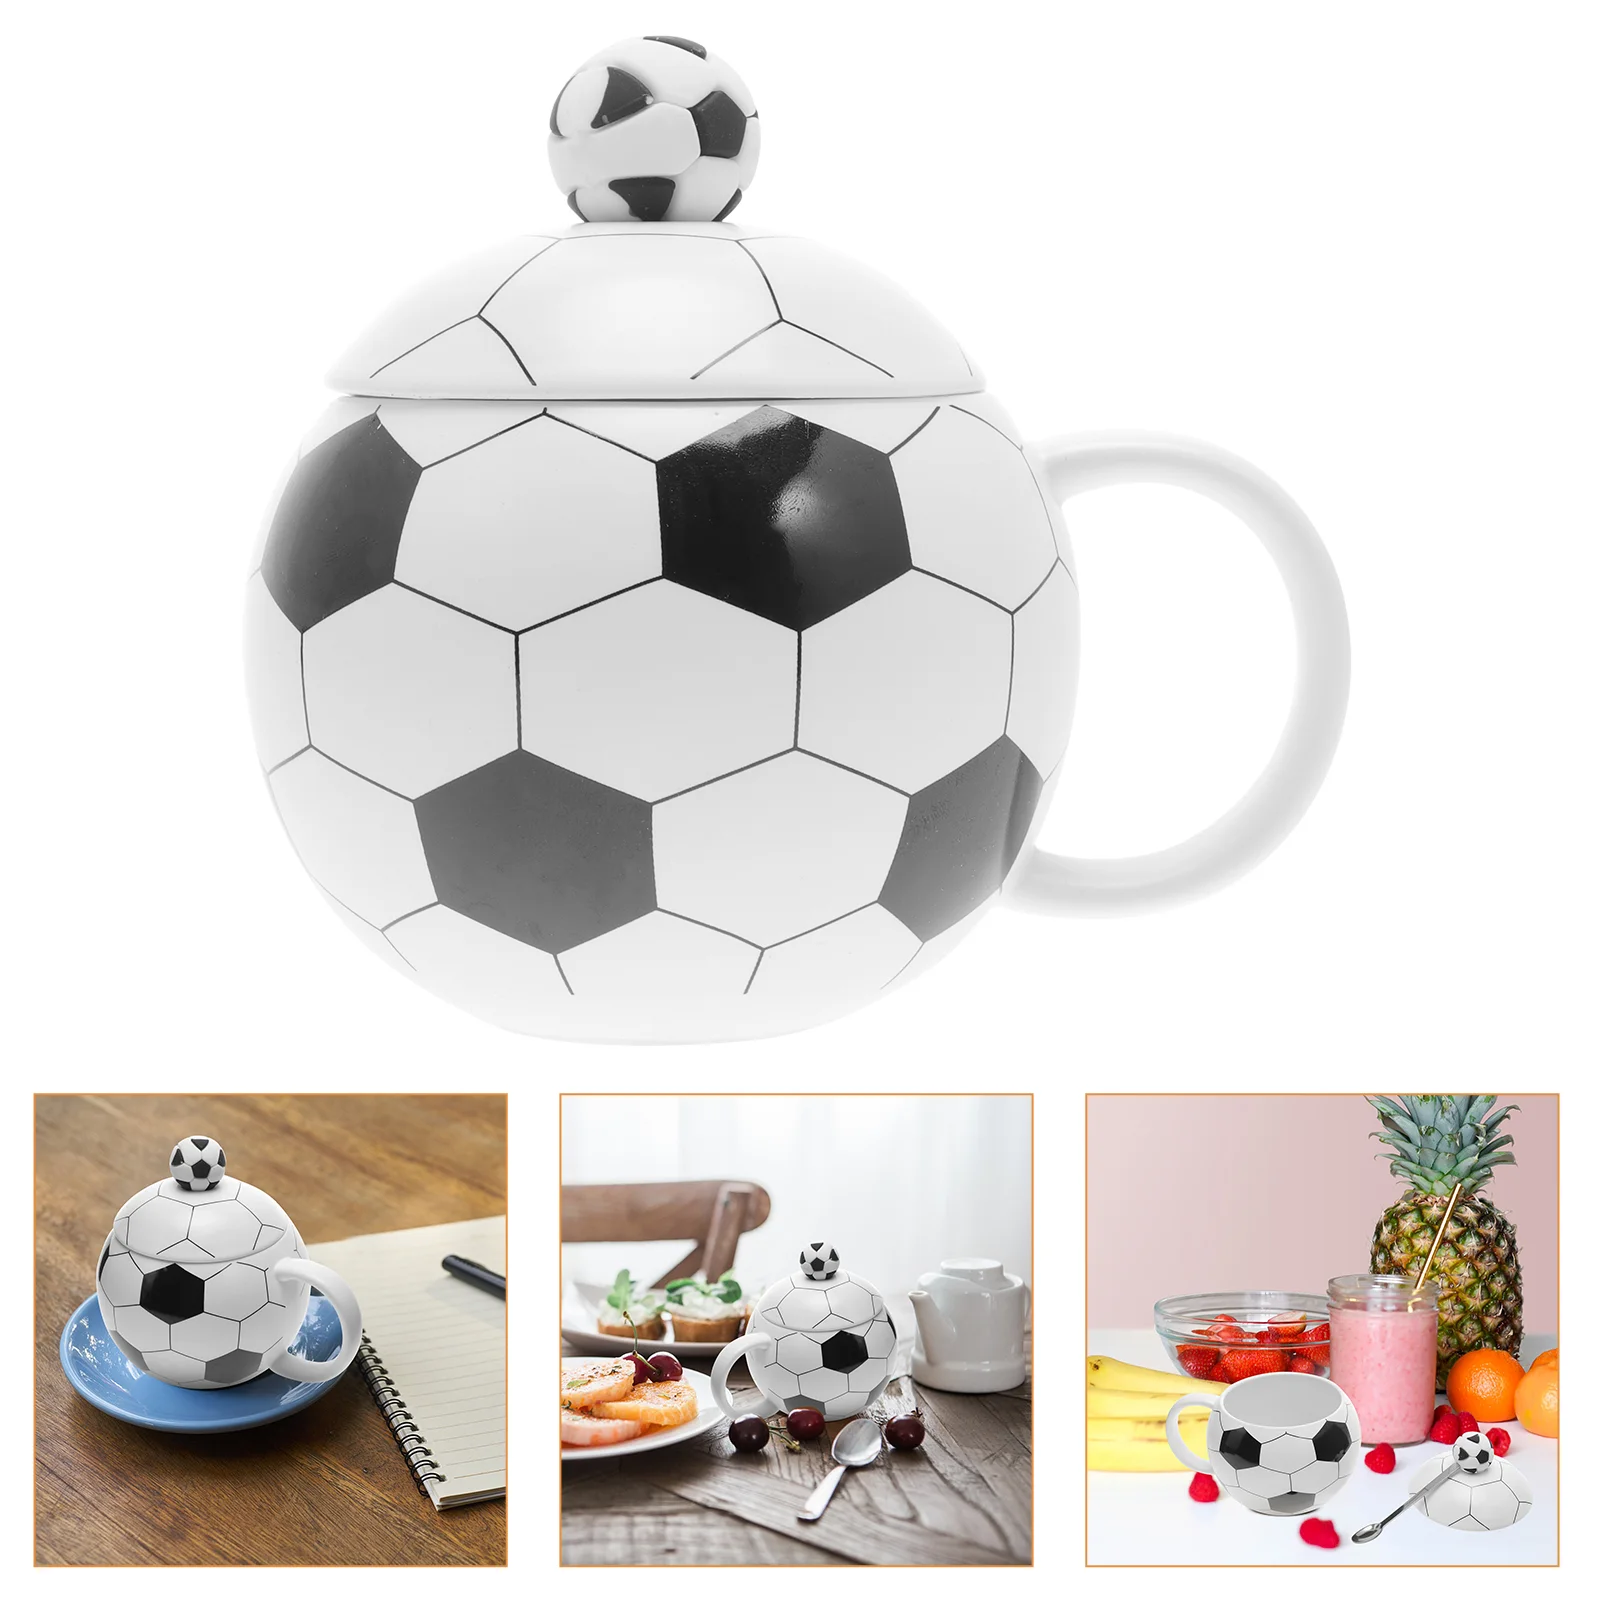 

Soccer Water Mug Novelty Ceramic Cup Coffee Mug Milk Beverage Cup for Banquet Party for Party Display Decorate Friends